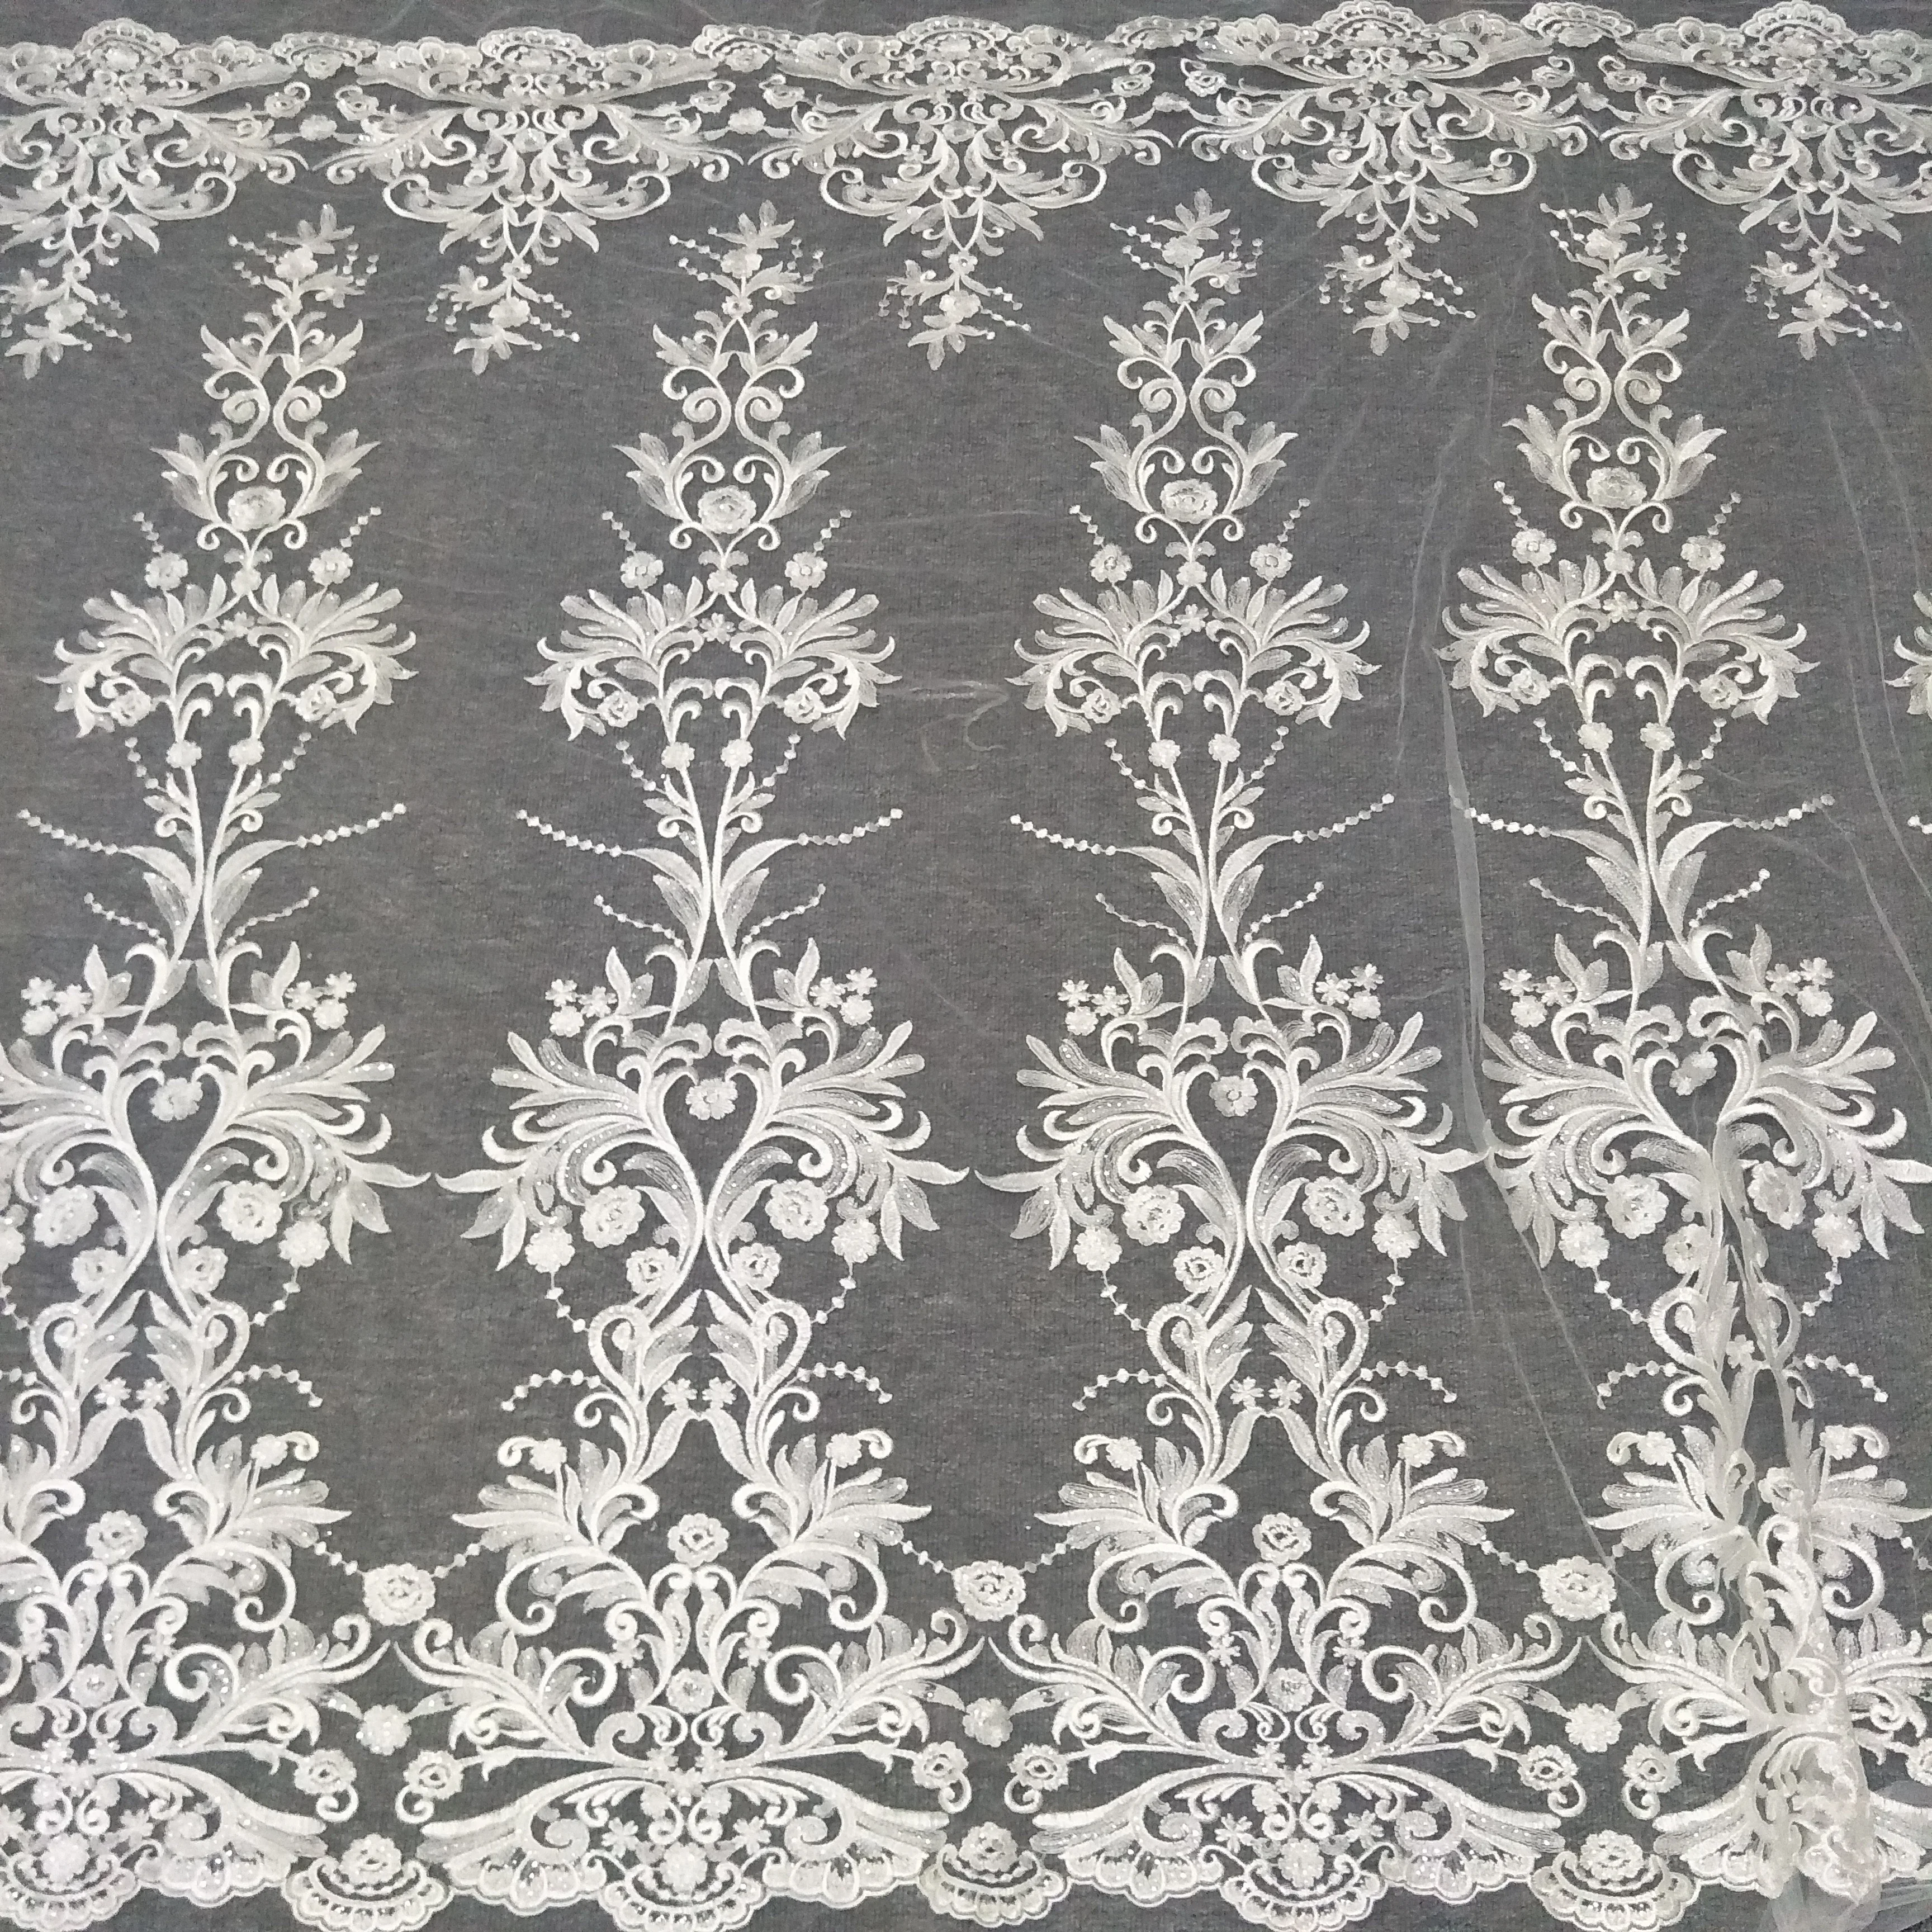 

hot selling bridal dress lace fabric elegant bridal lace fabric 130cm width wedding gown lace sell by yard